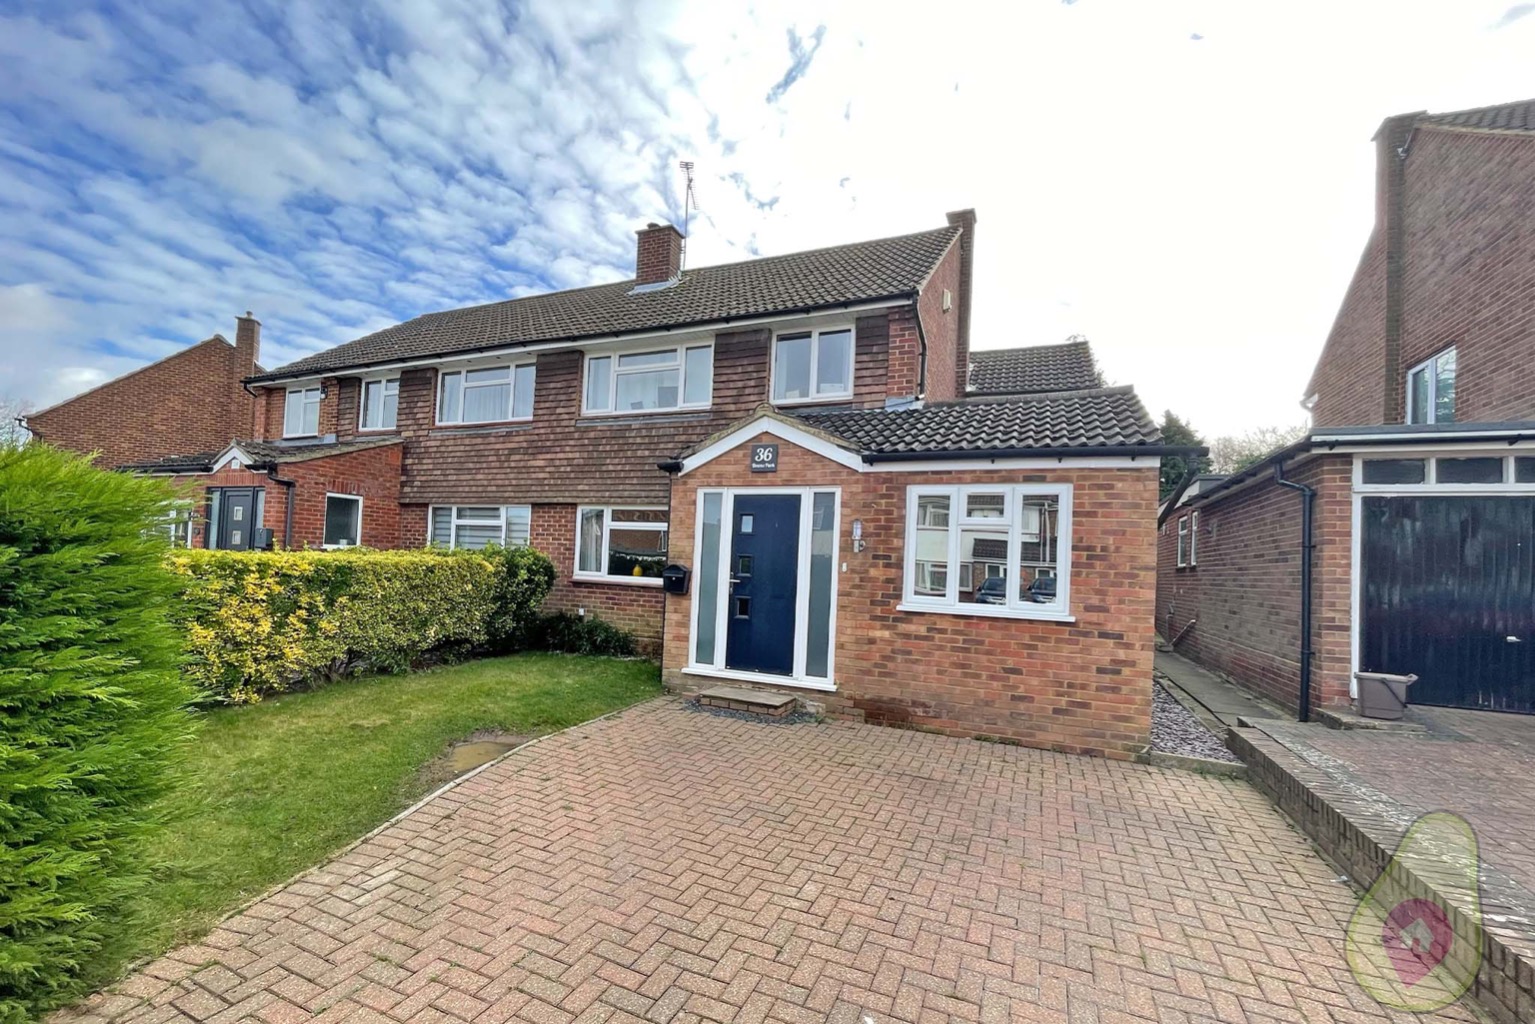 **CHECK OUT THE PROPERTY VIDEO** A stunning four bedroom semi detached home. This property provides accommodation that would be perfect for a family, including a cloakroom, downstairs shower room, lounge, dining room, large open plan kitchen with a  separate pantry and a utility room.